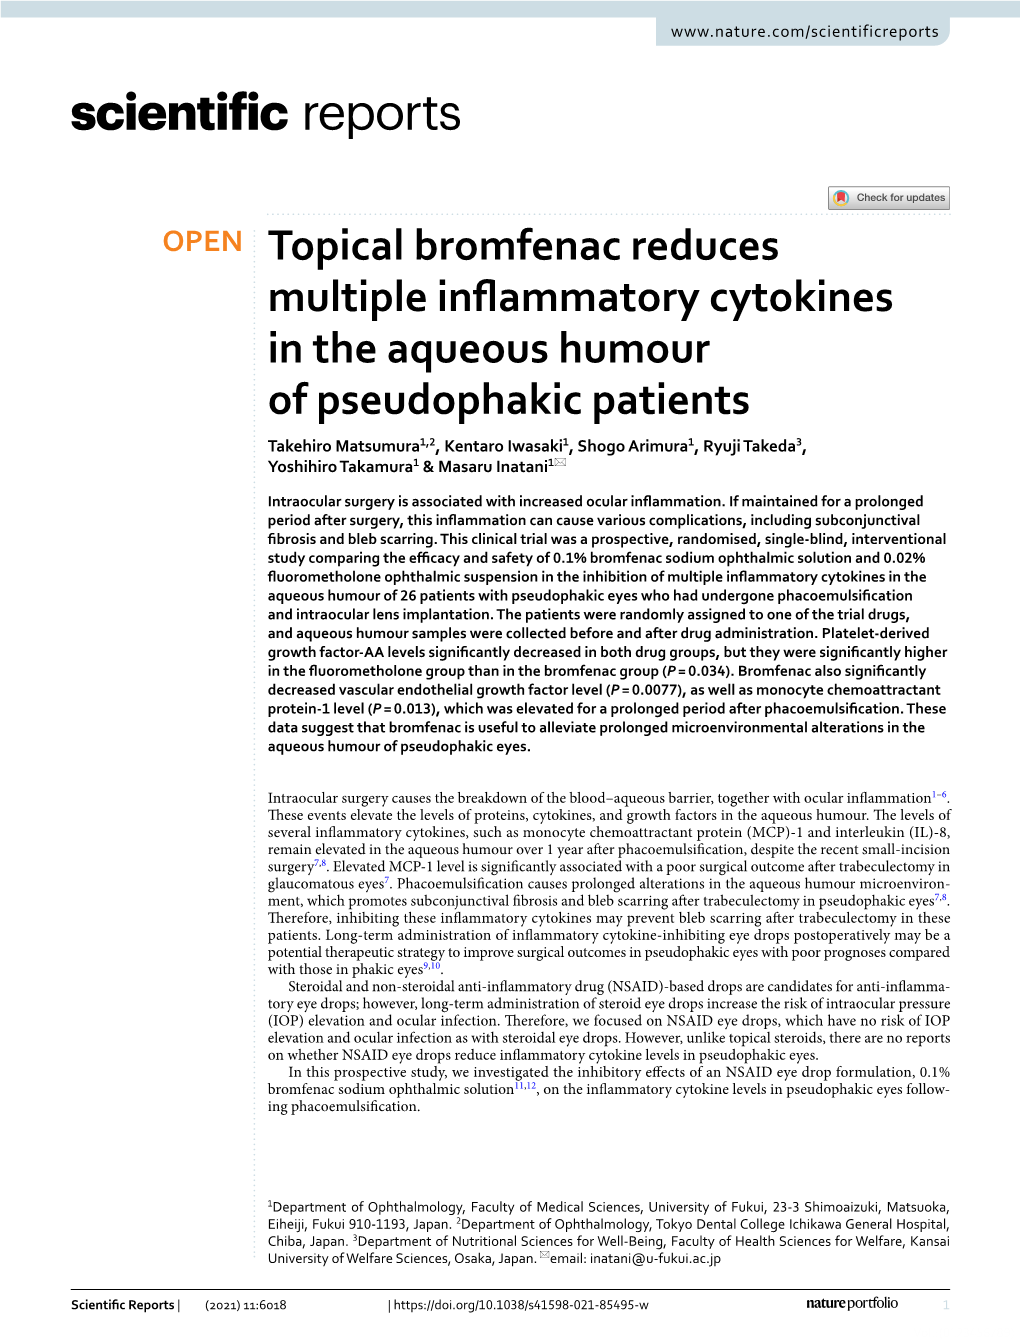 Topical Bromfenac Reduces Multiple Inflammatory Cytokines in The